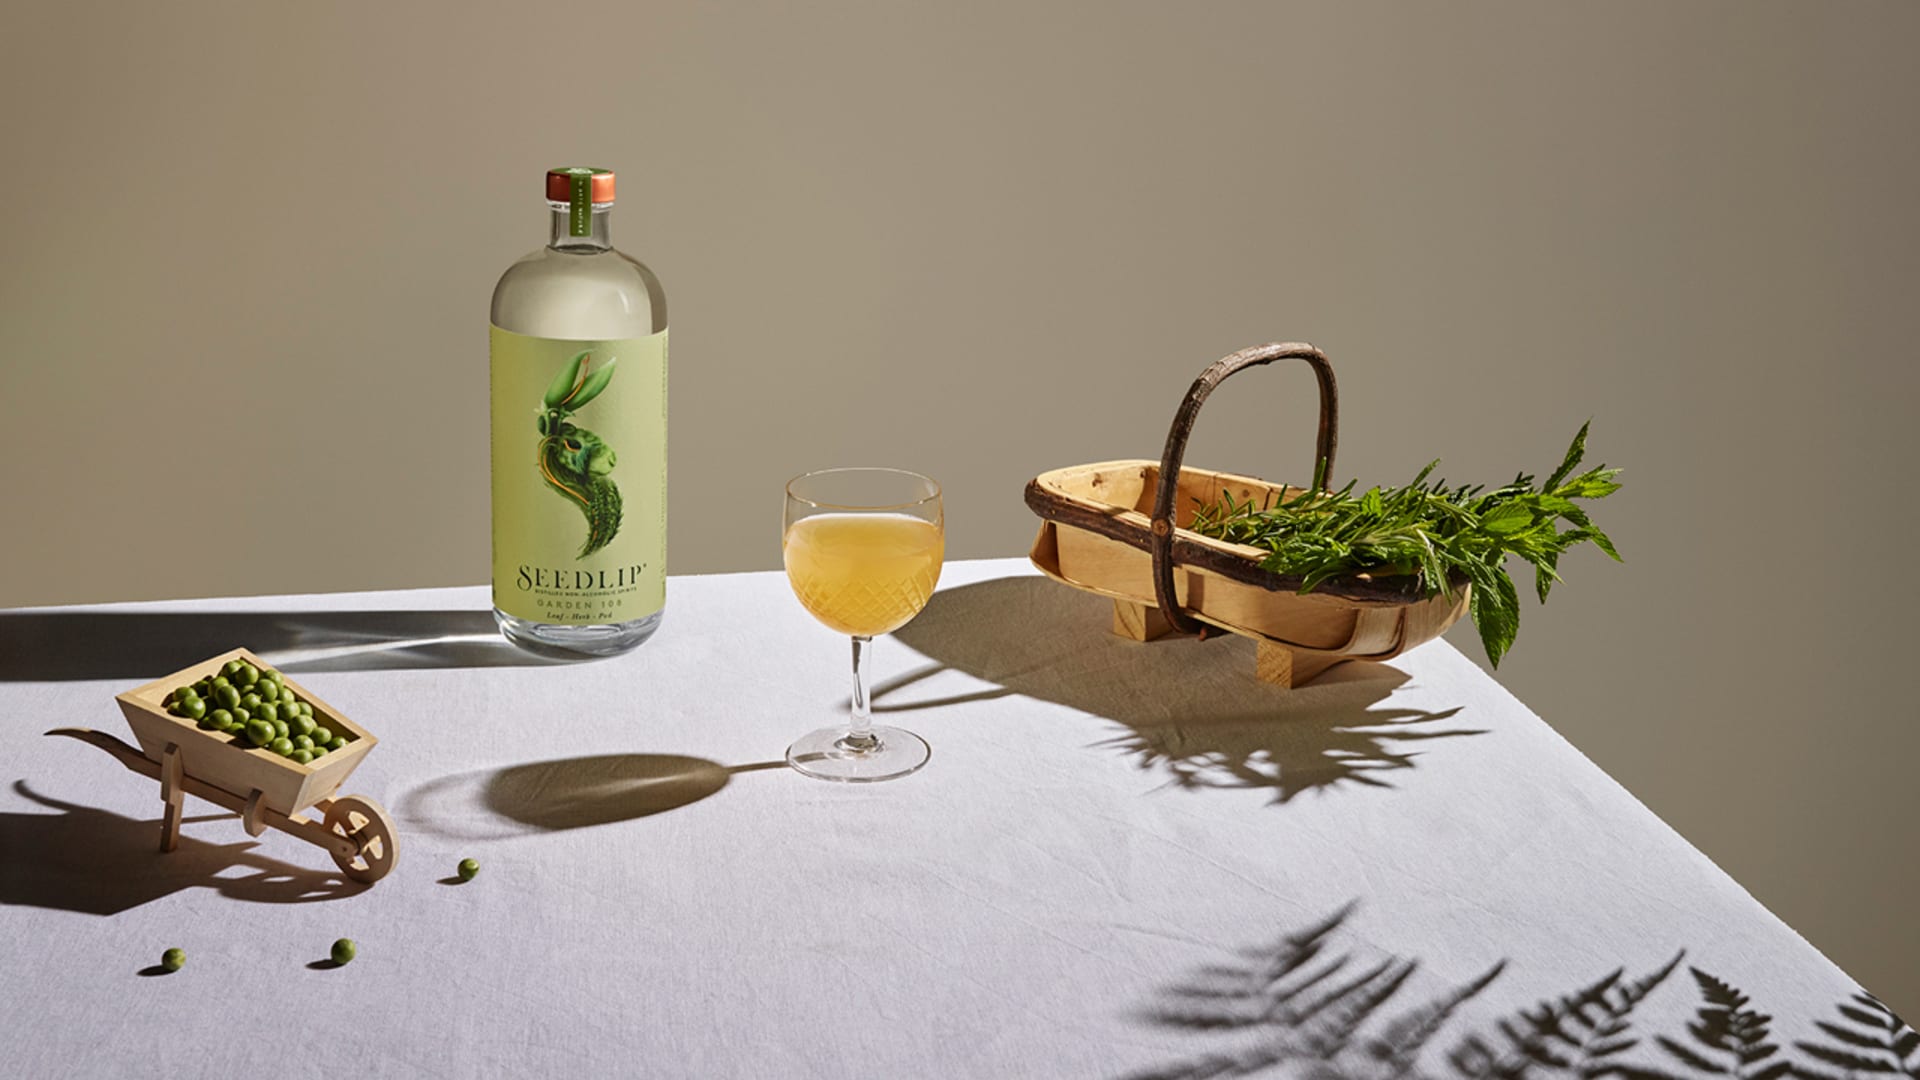 This Non-Alcoholic Spirit Is Making A Splash With Health Enthusiasts